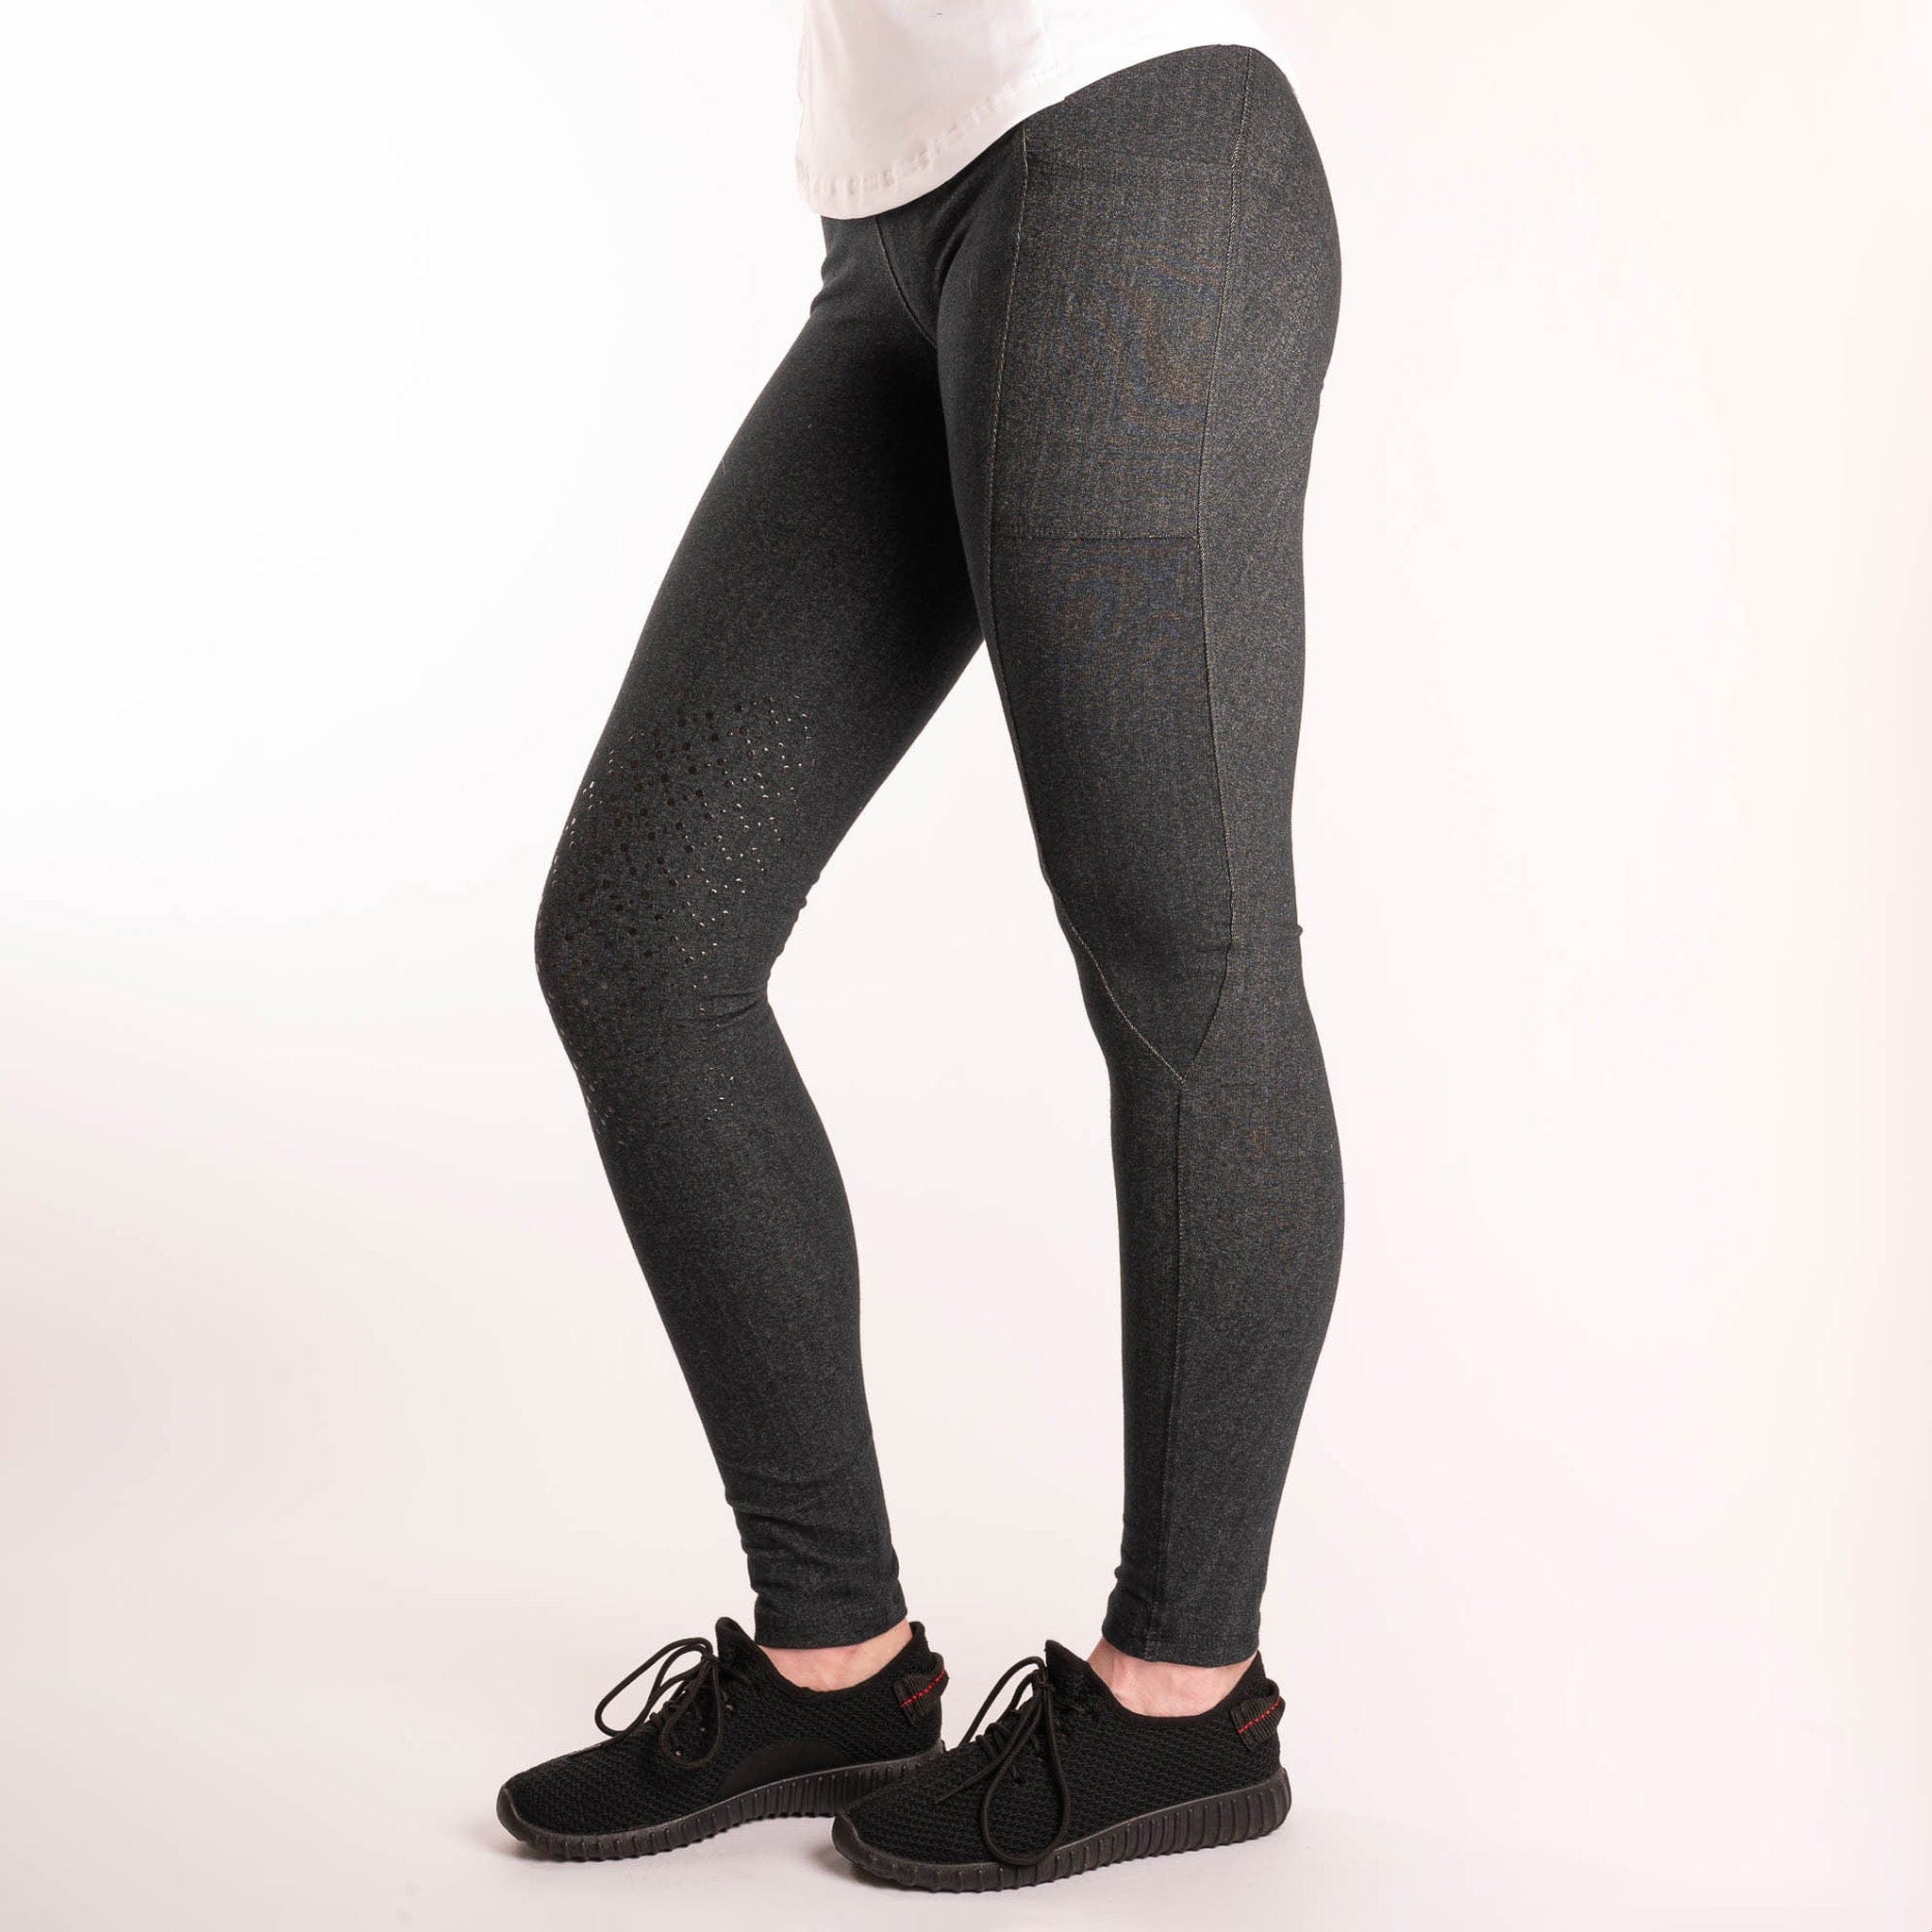 Gallop Denim Look High Waist Silicone Knee Patch Riding Tights T644 Grey Side On Model